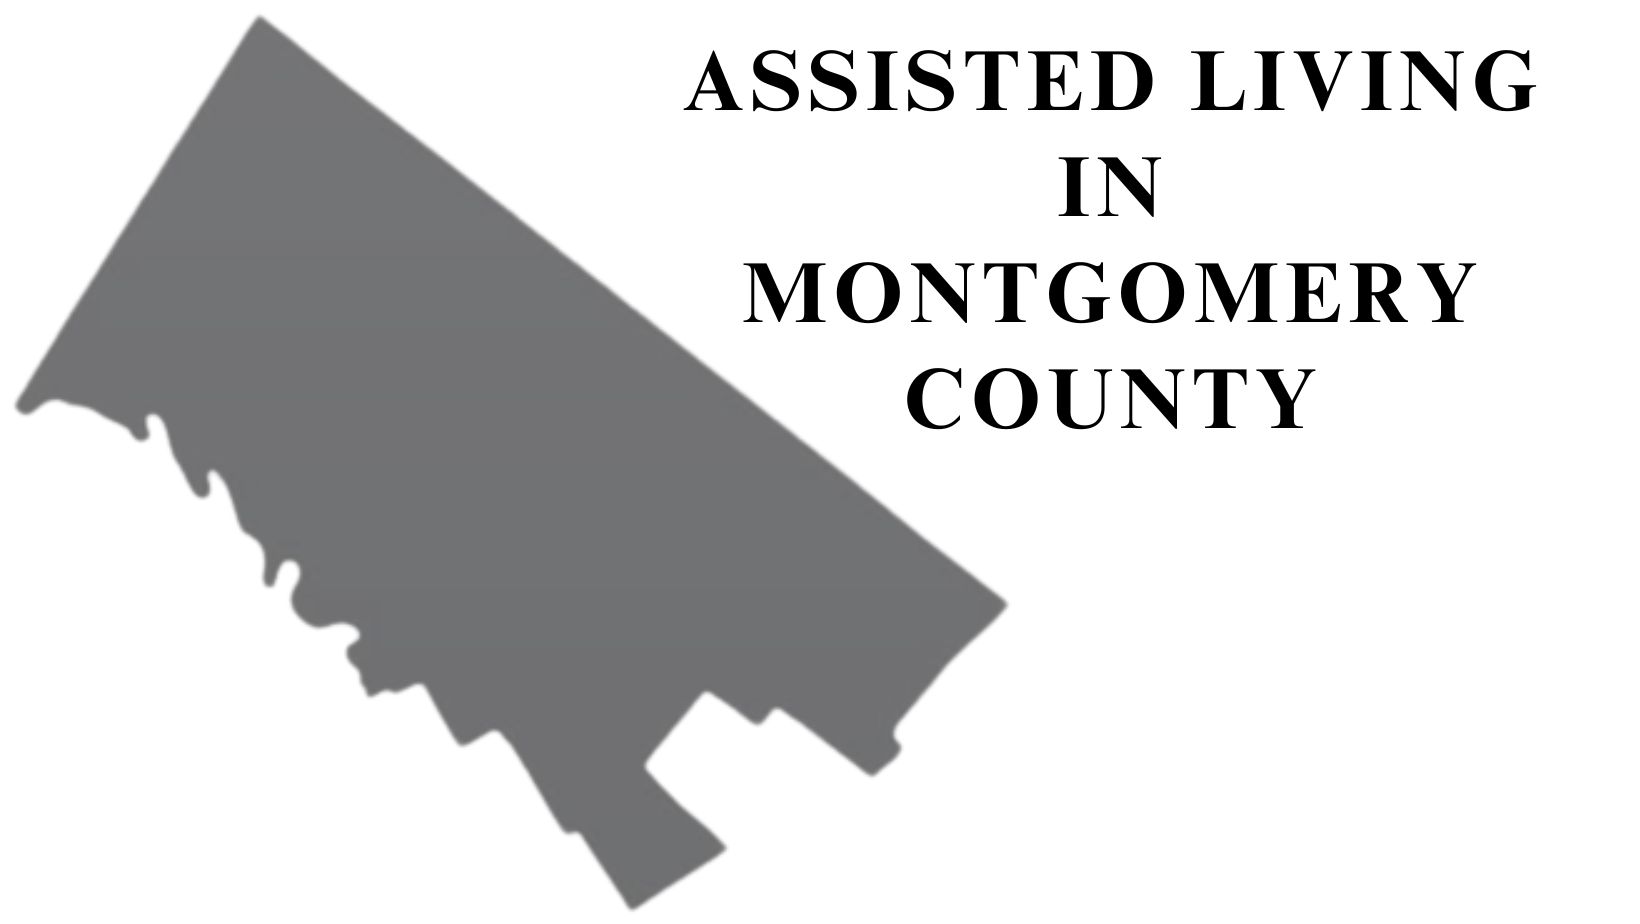 Assisted living in Montgomery County